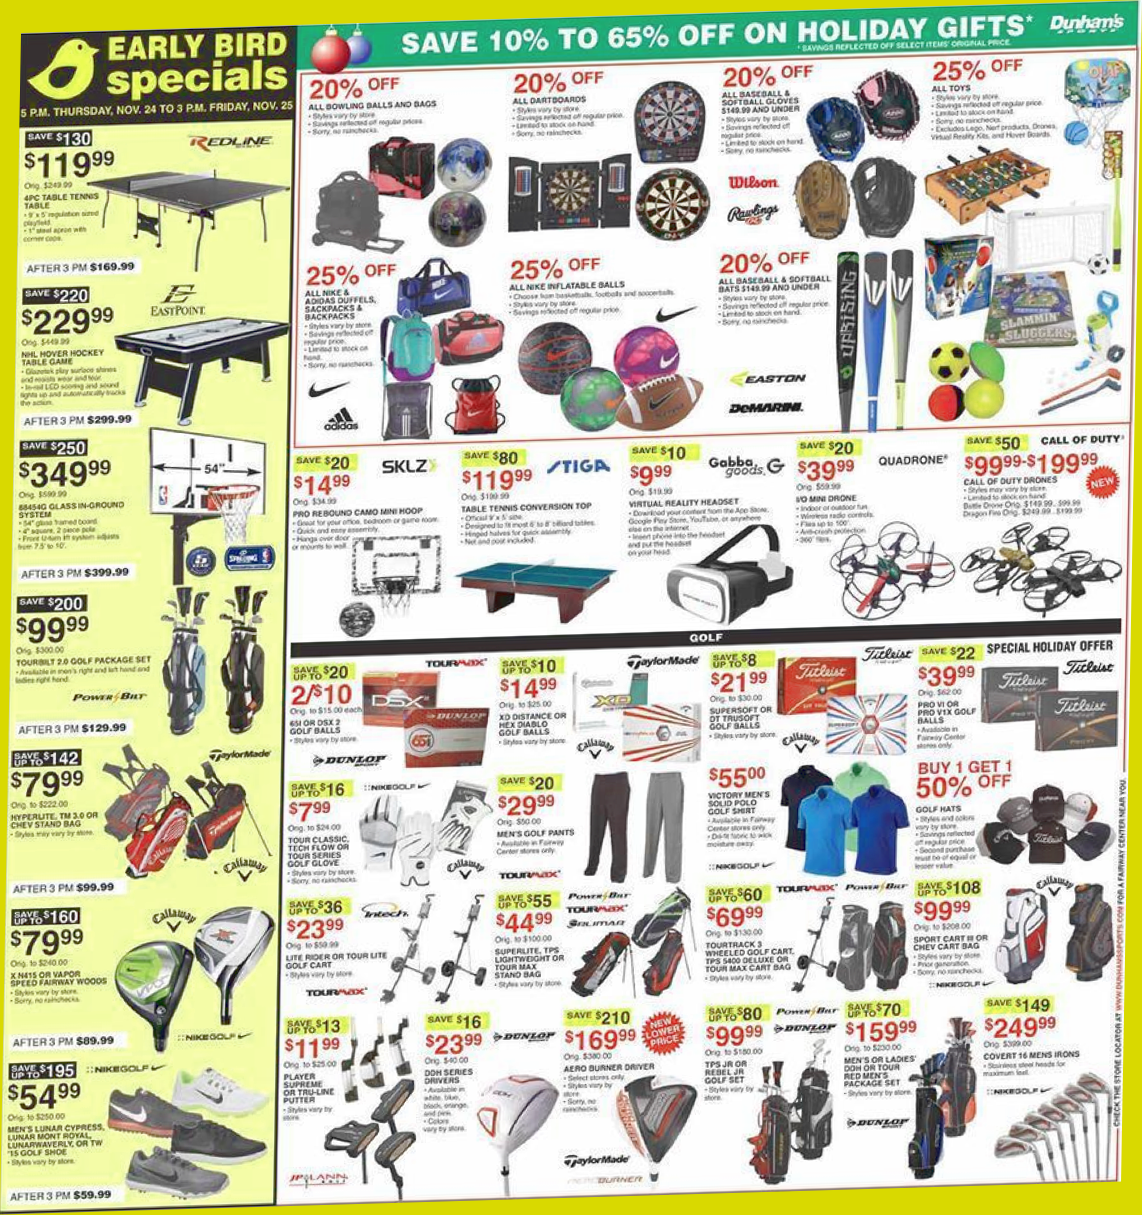 Dunham’s Sports Black Friday 2017 Sale & Ad Scan | Blacker Friday! - What Time Academy Sports Open On Black Friday